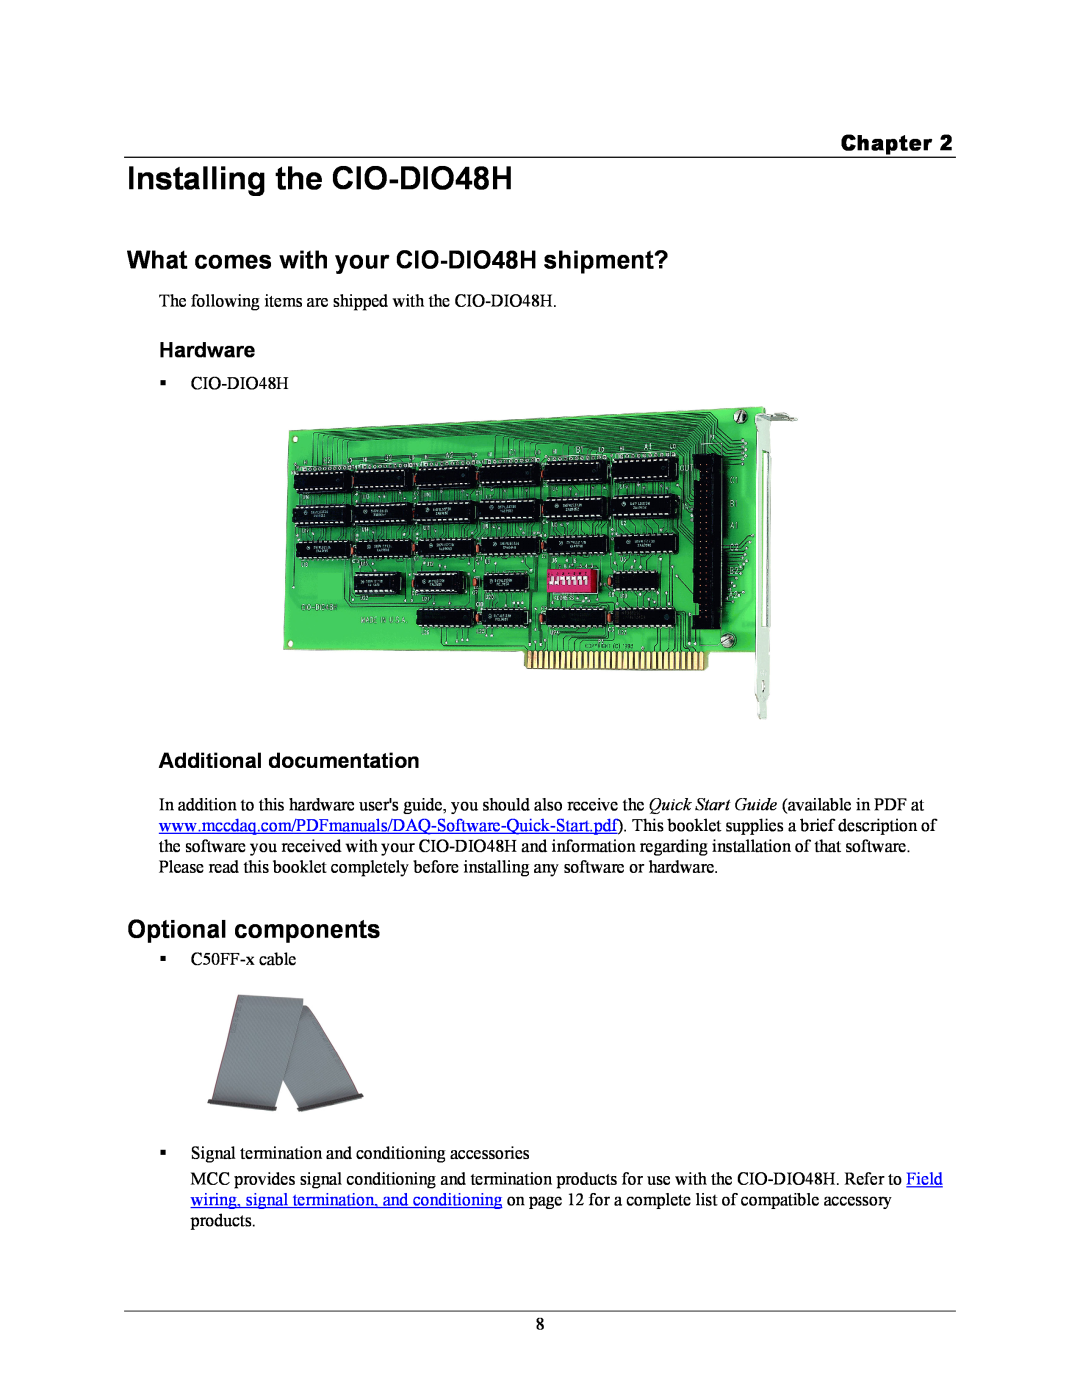 IBM manual Installing the CIO-DIO48H, What comes with your CIO-DIO48H shipment?, Optional components, Hardware, Chapter 